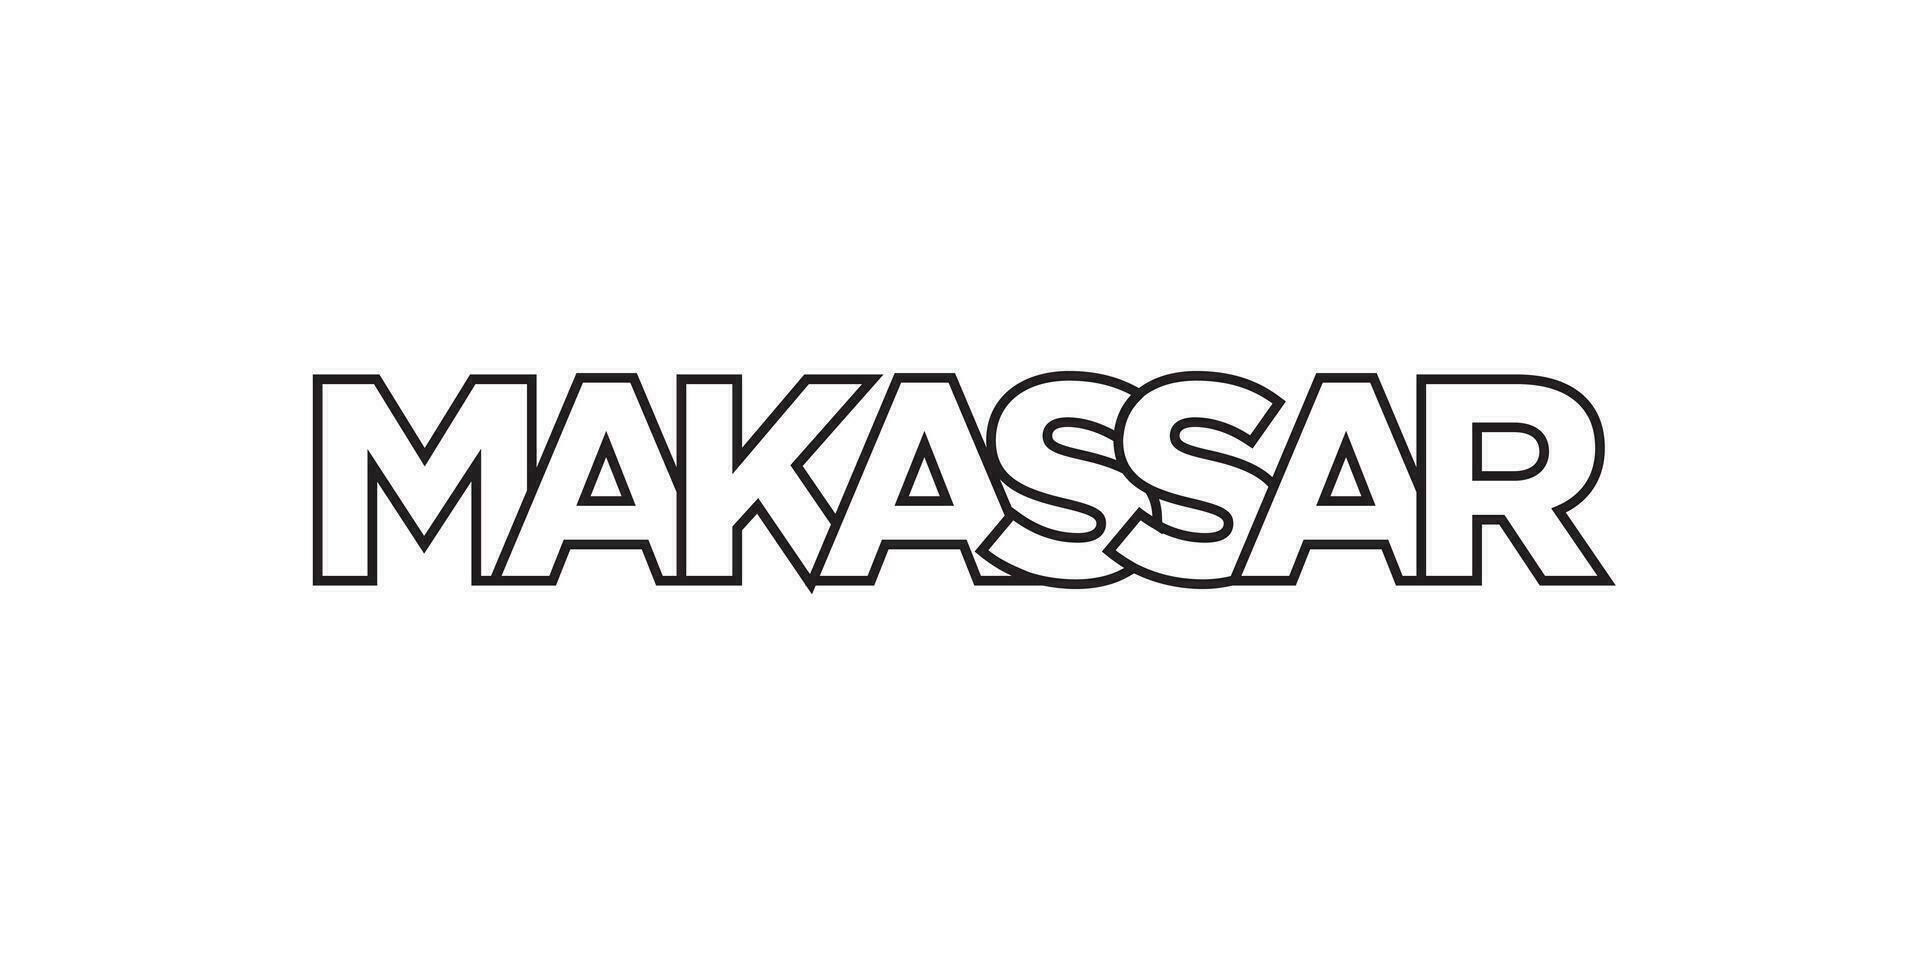 Makassar in the Indonesia emblem. The design features a geometric style, vector illustration with bold typography in a modern font. The graphic slogan lettering.